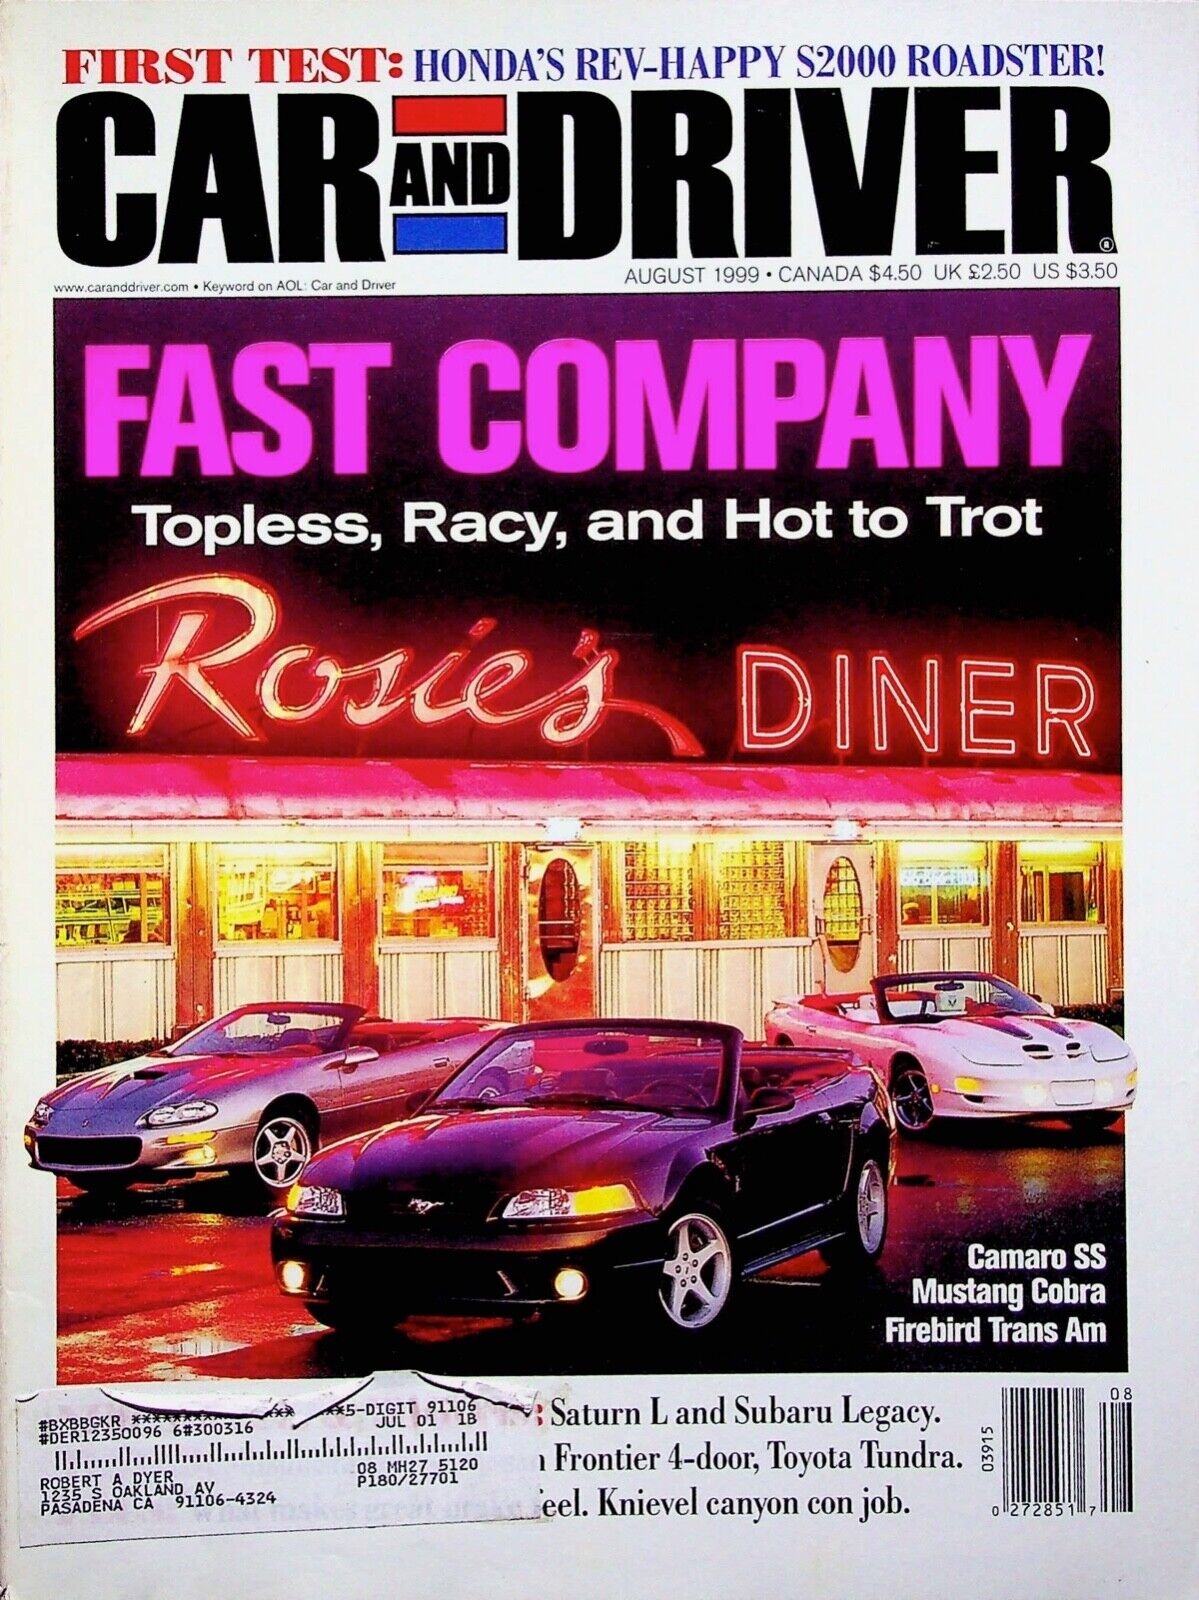 FAST COMPANY TOPLESS, RACY, AND HOT TO TROT - CAR AND DRIVER MAGAZINE, AUG 1999